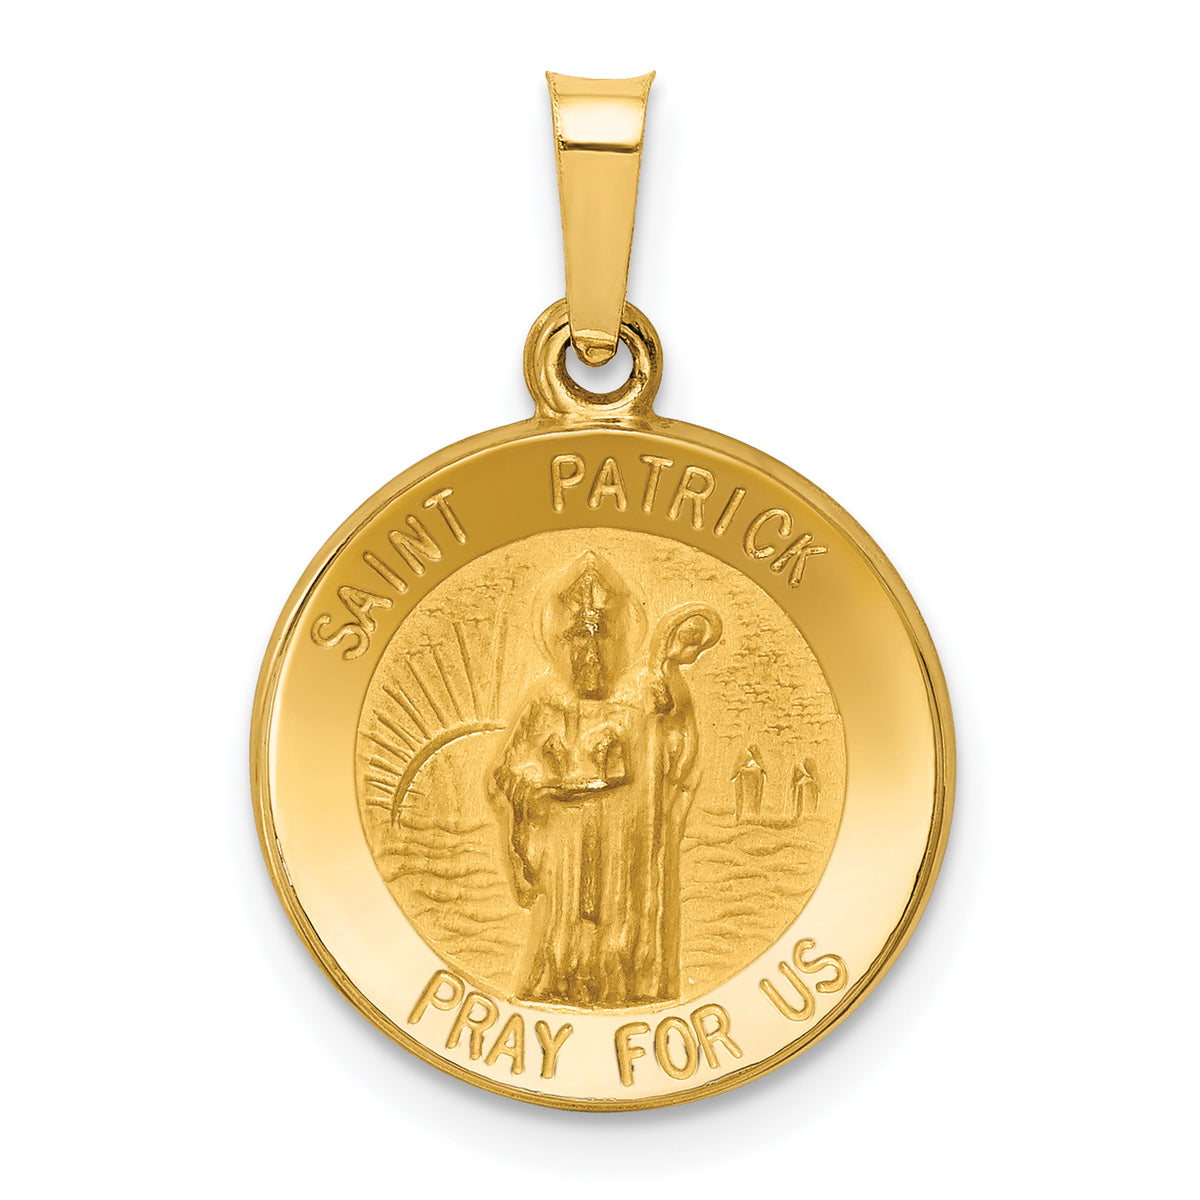 14k Polished and Satin St Patrick Medal Hollow Pendant